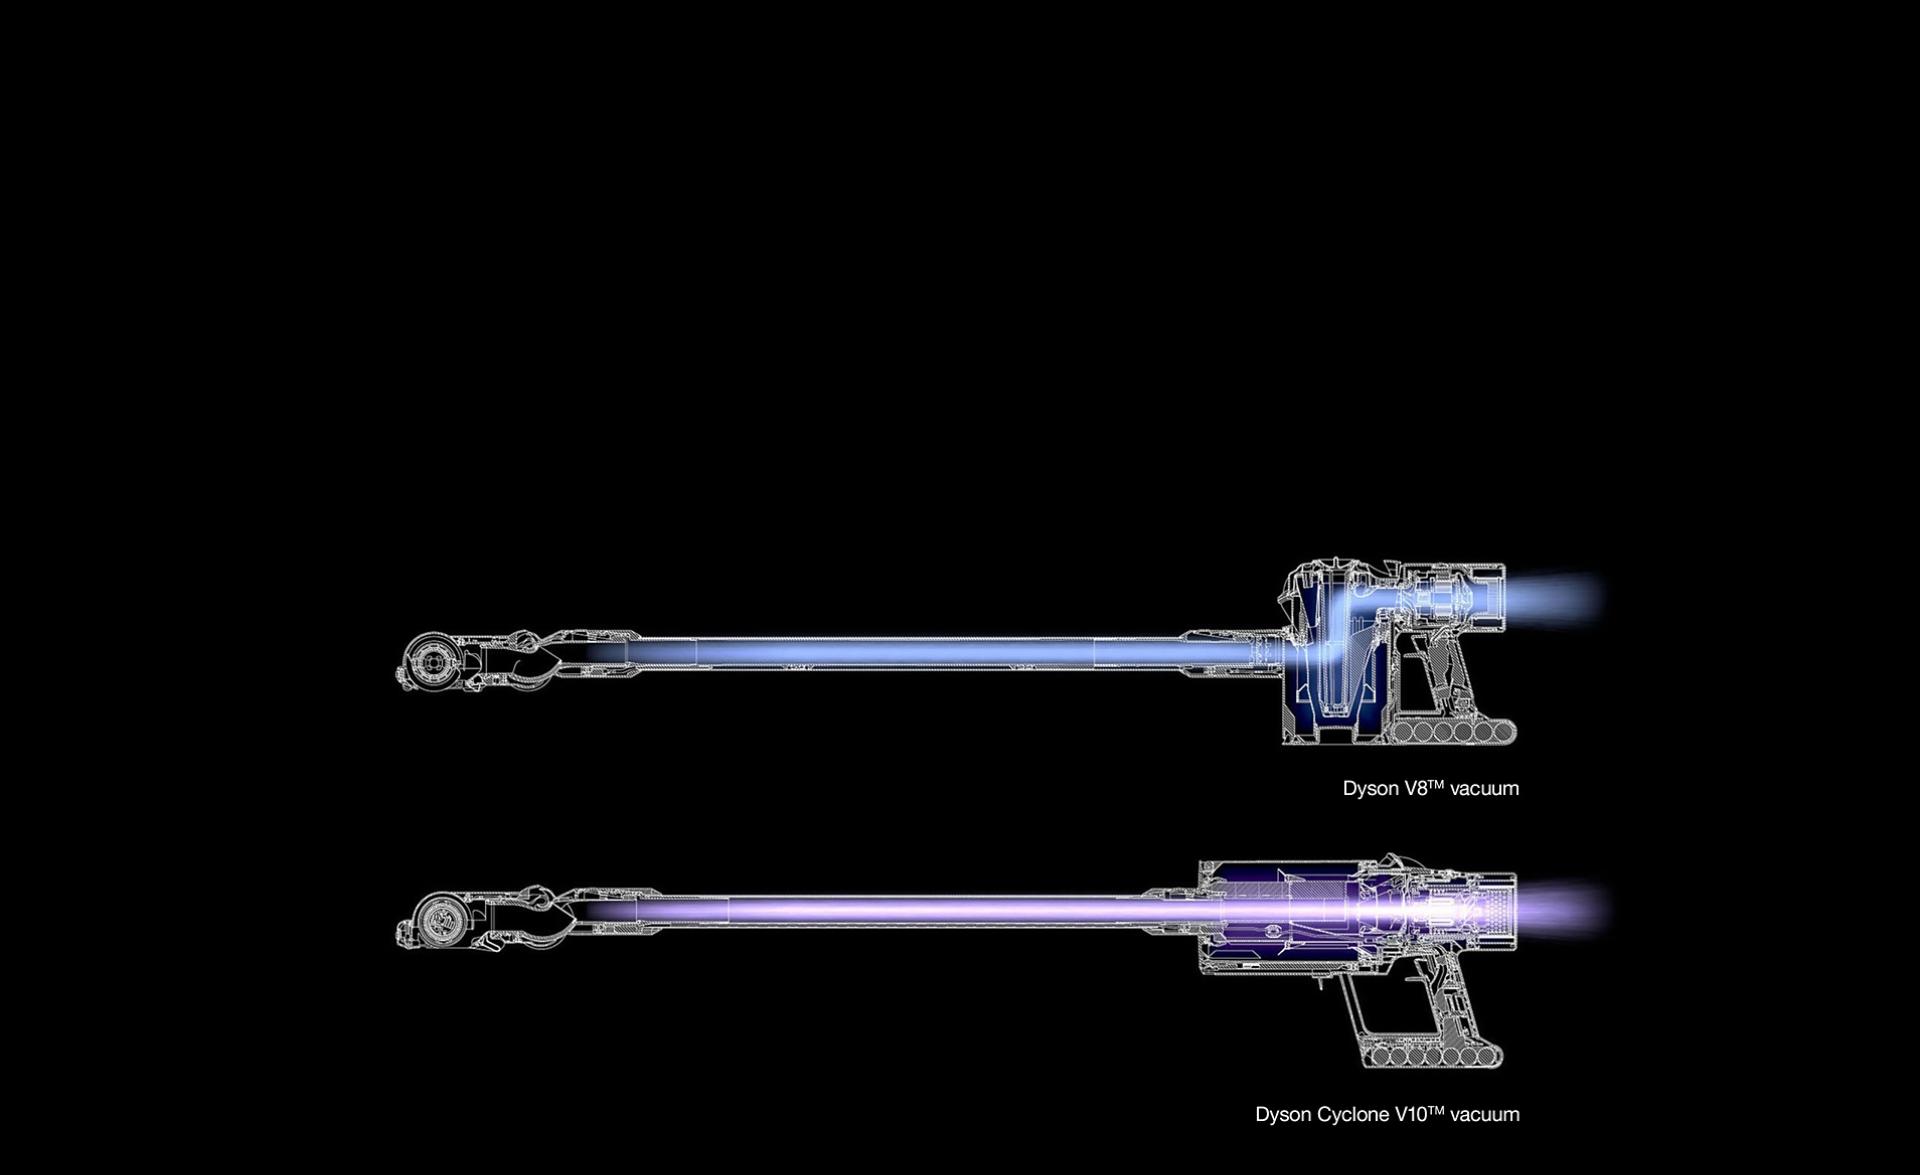 Graphic of airflow comparison through Dyson V8™ vacuum and Dyson Cyclone V10™ vacuum